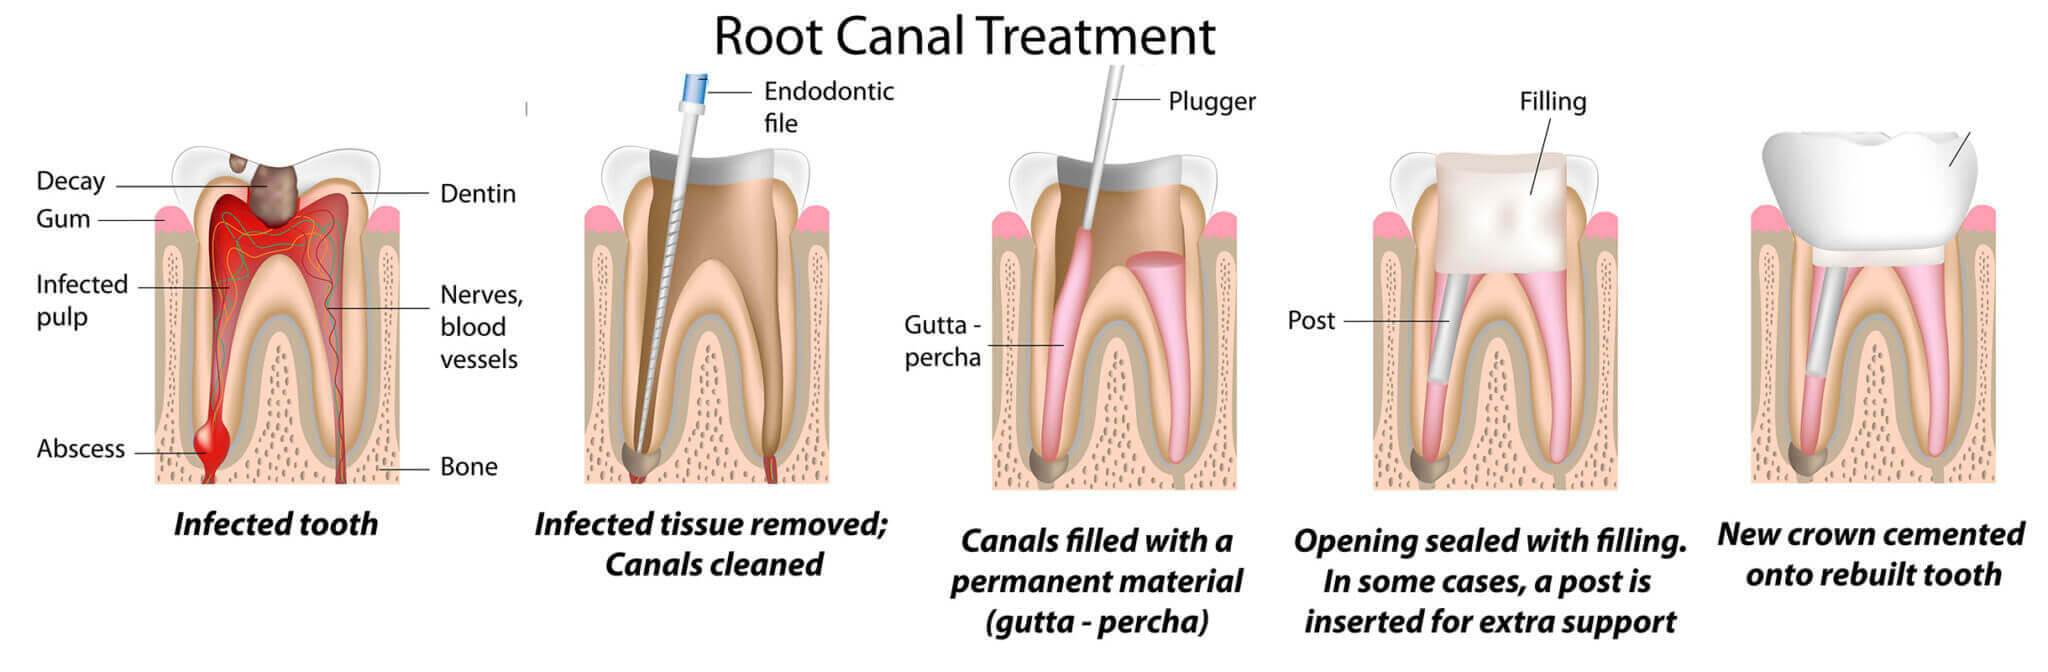 Root Canal Treatment Graphic